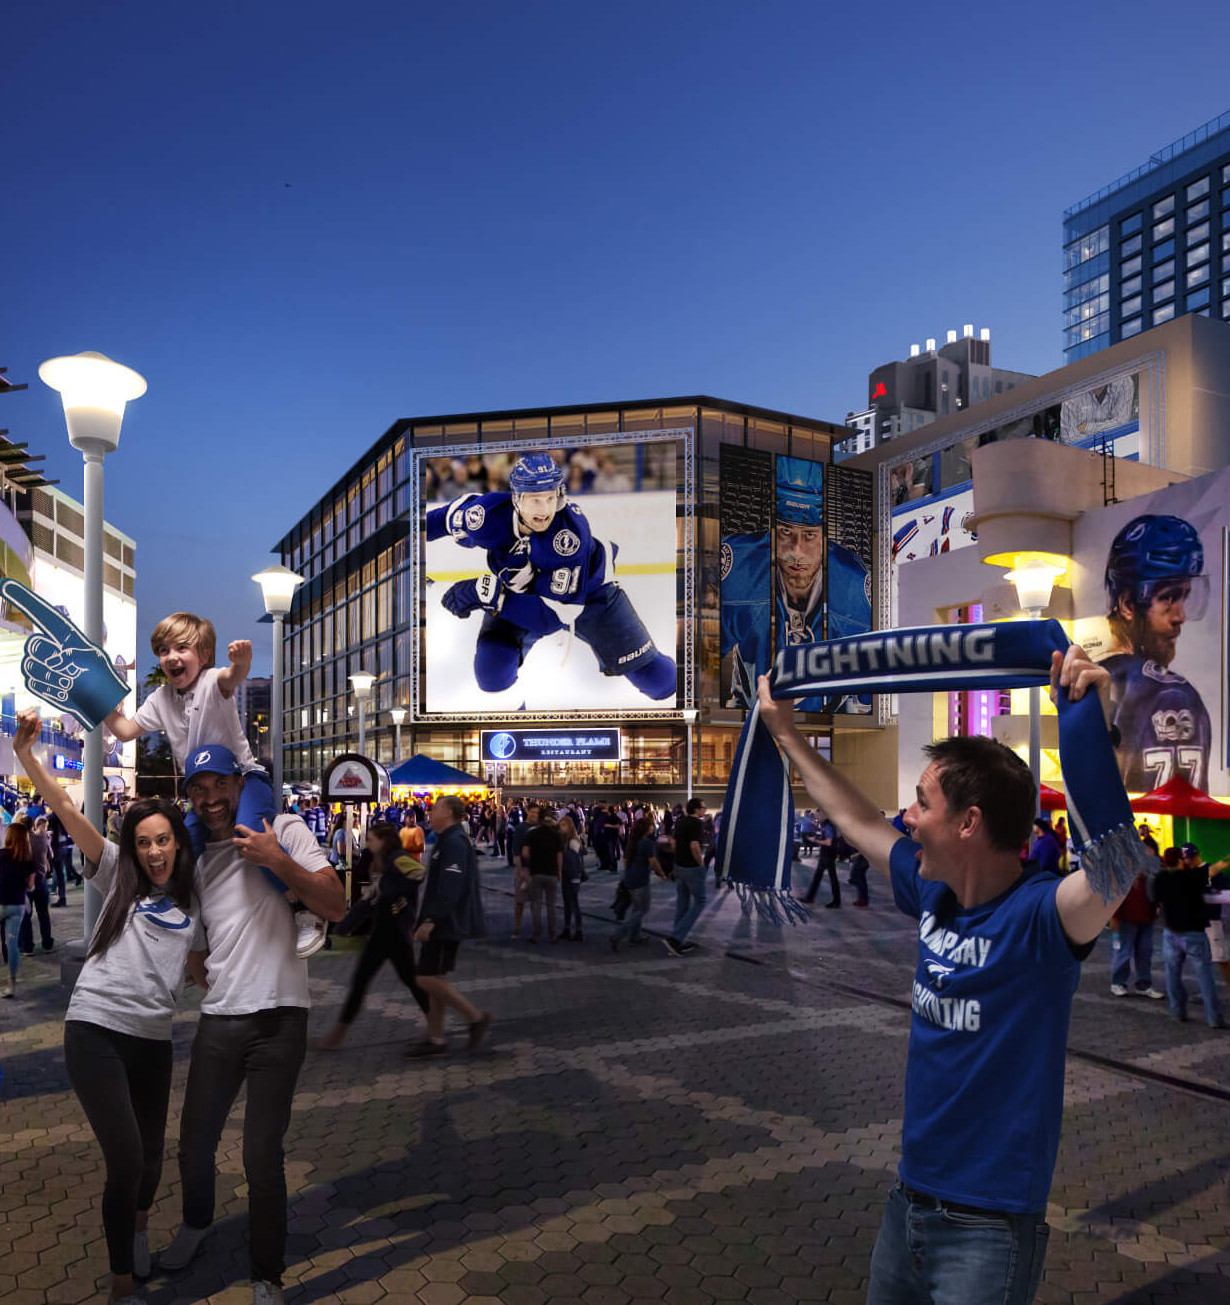 rendering of people in a town square celebrating the Tampa Bay Lightning hockey team